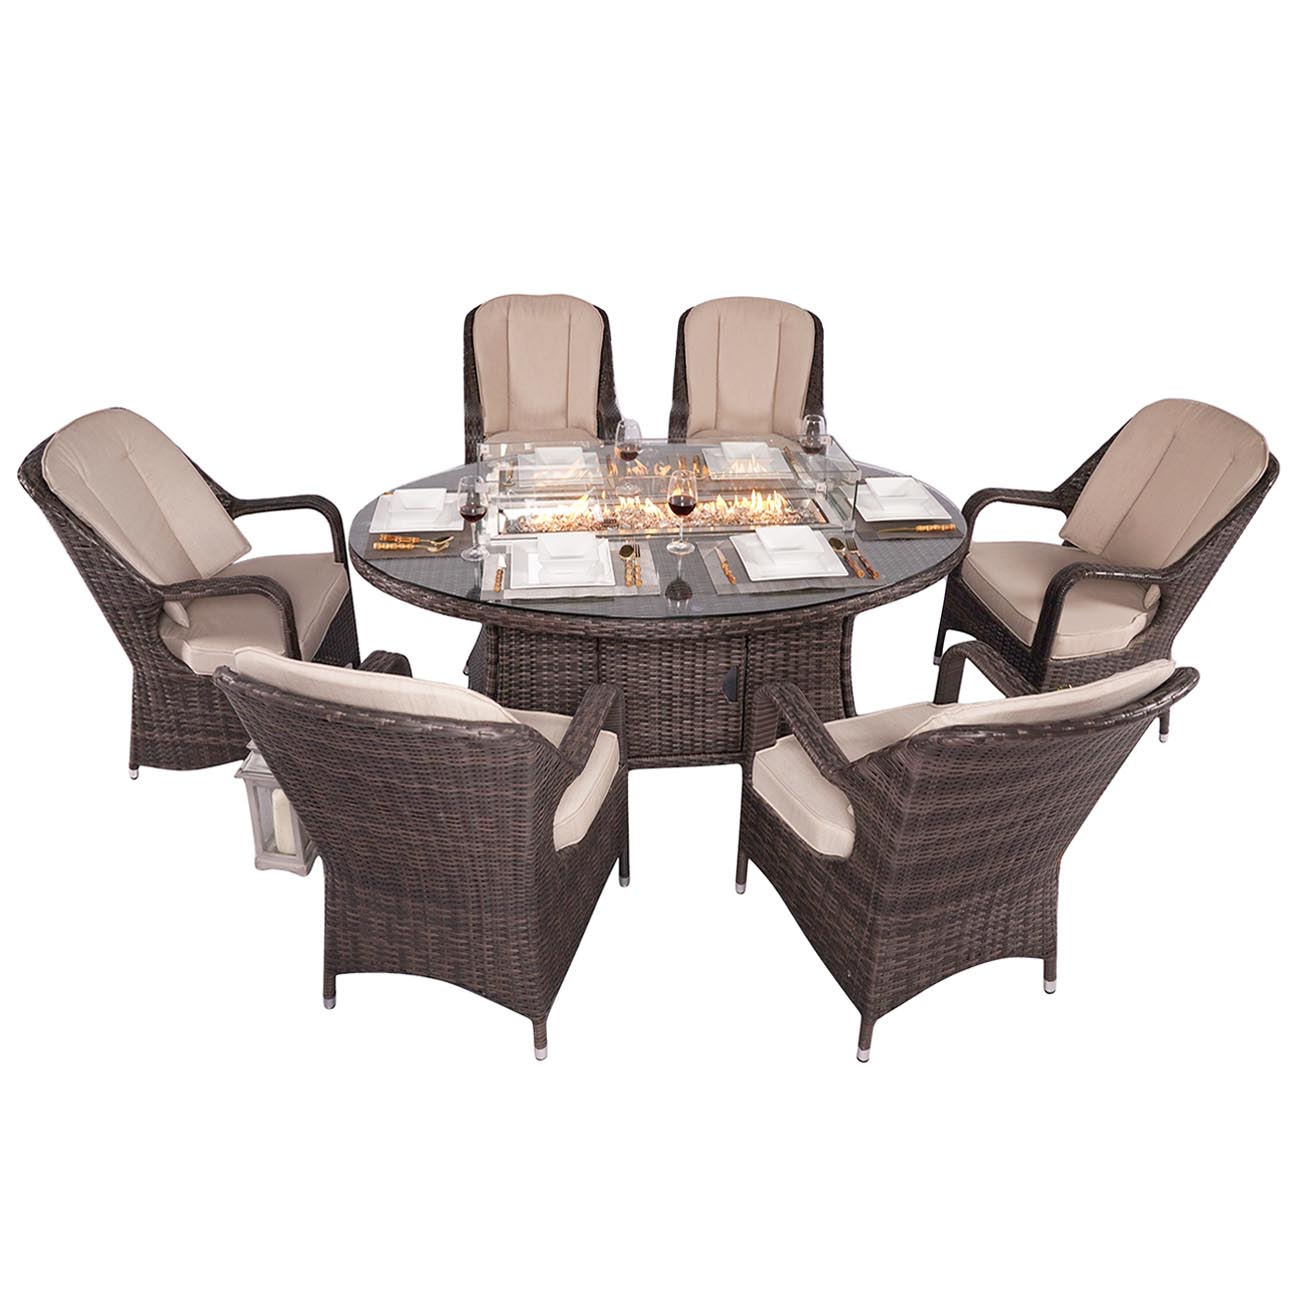 Garden Rattan Wicker Out Furniture Sale Patio 6 Seat Fire Pit Table & Eton Chair Set - Abrihome PAG-1106-OVAL